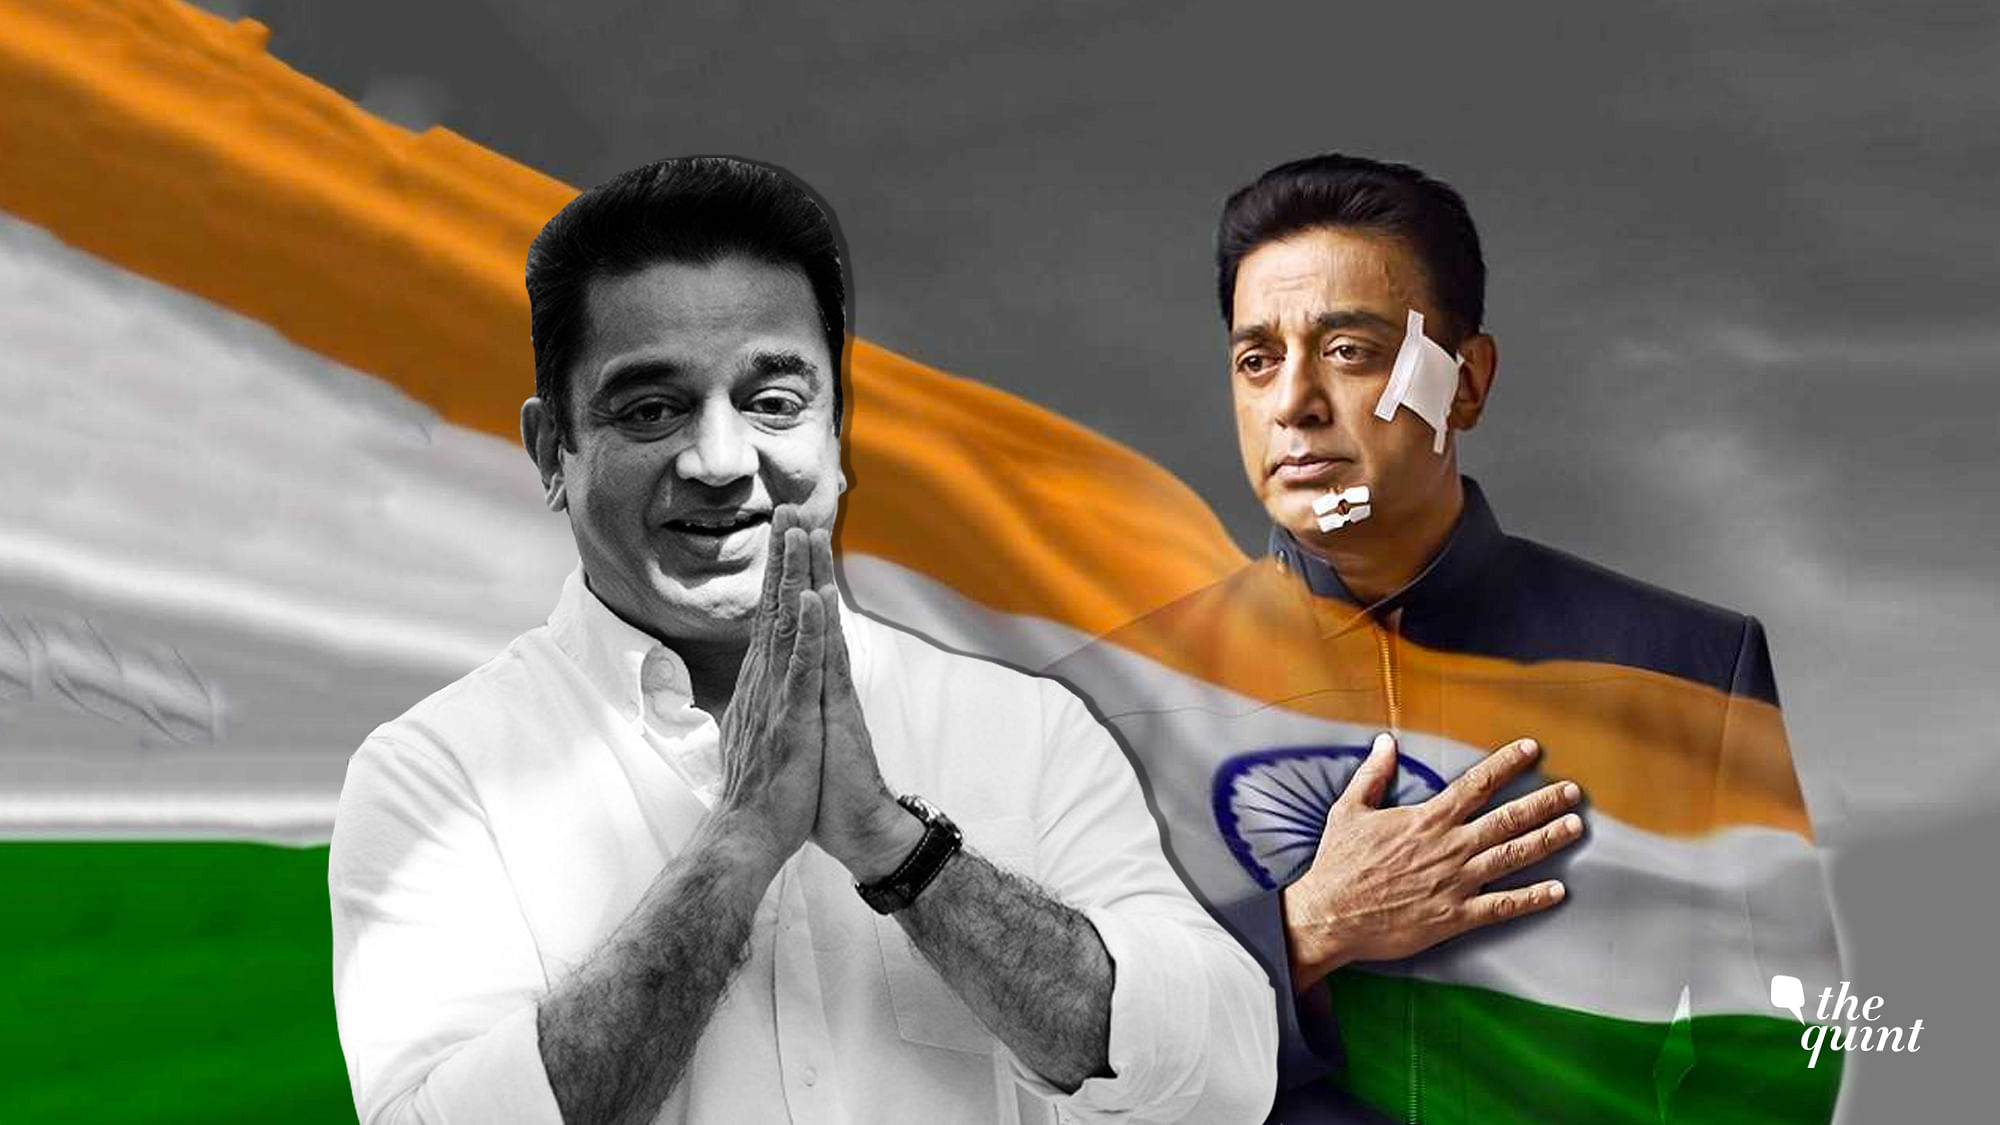 Kamal Haasan says he will phase out his involvement in cinema to immerse himself in politics.